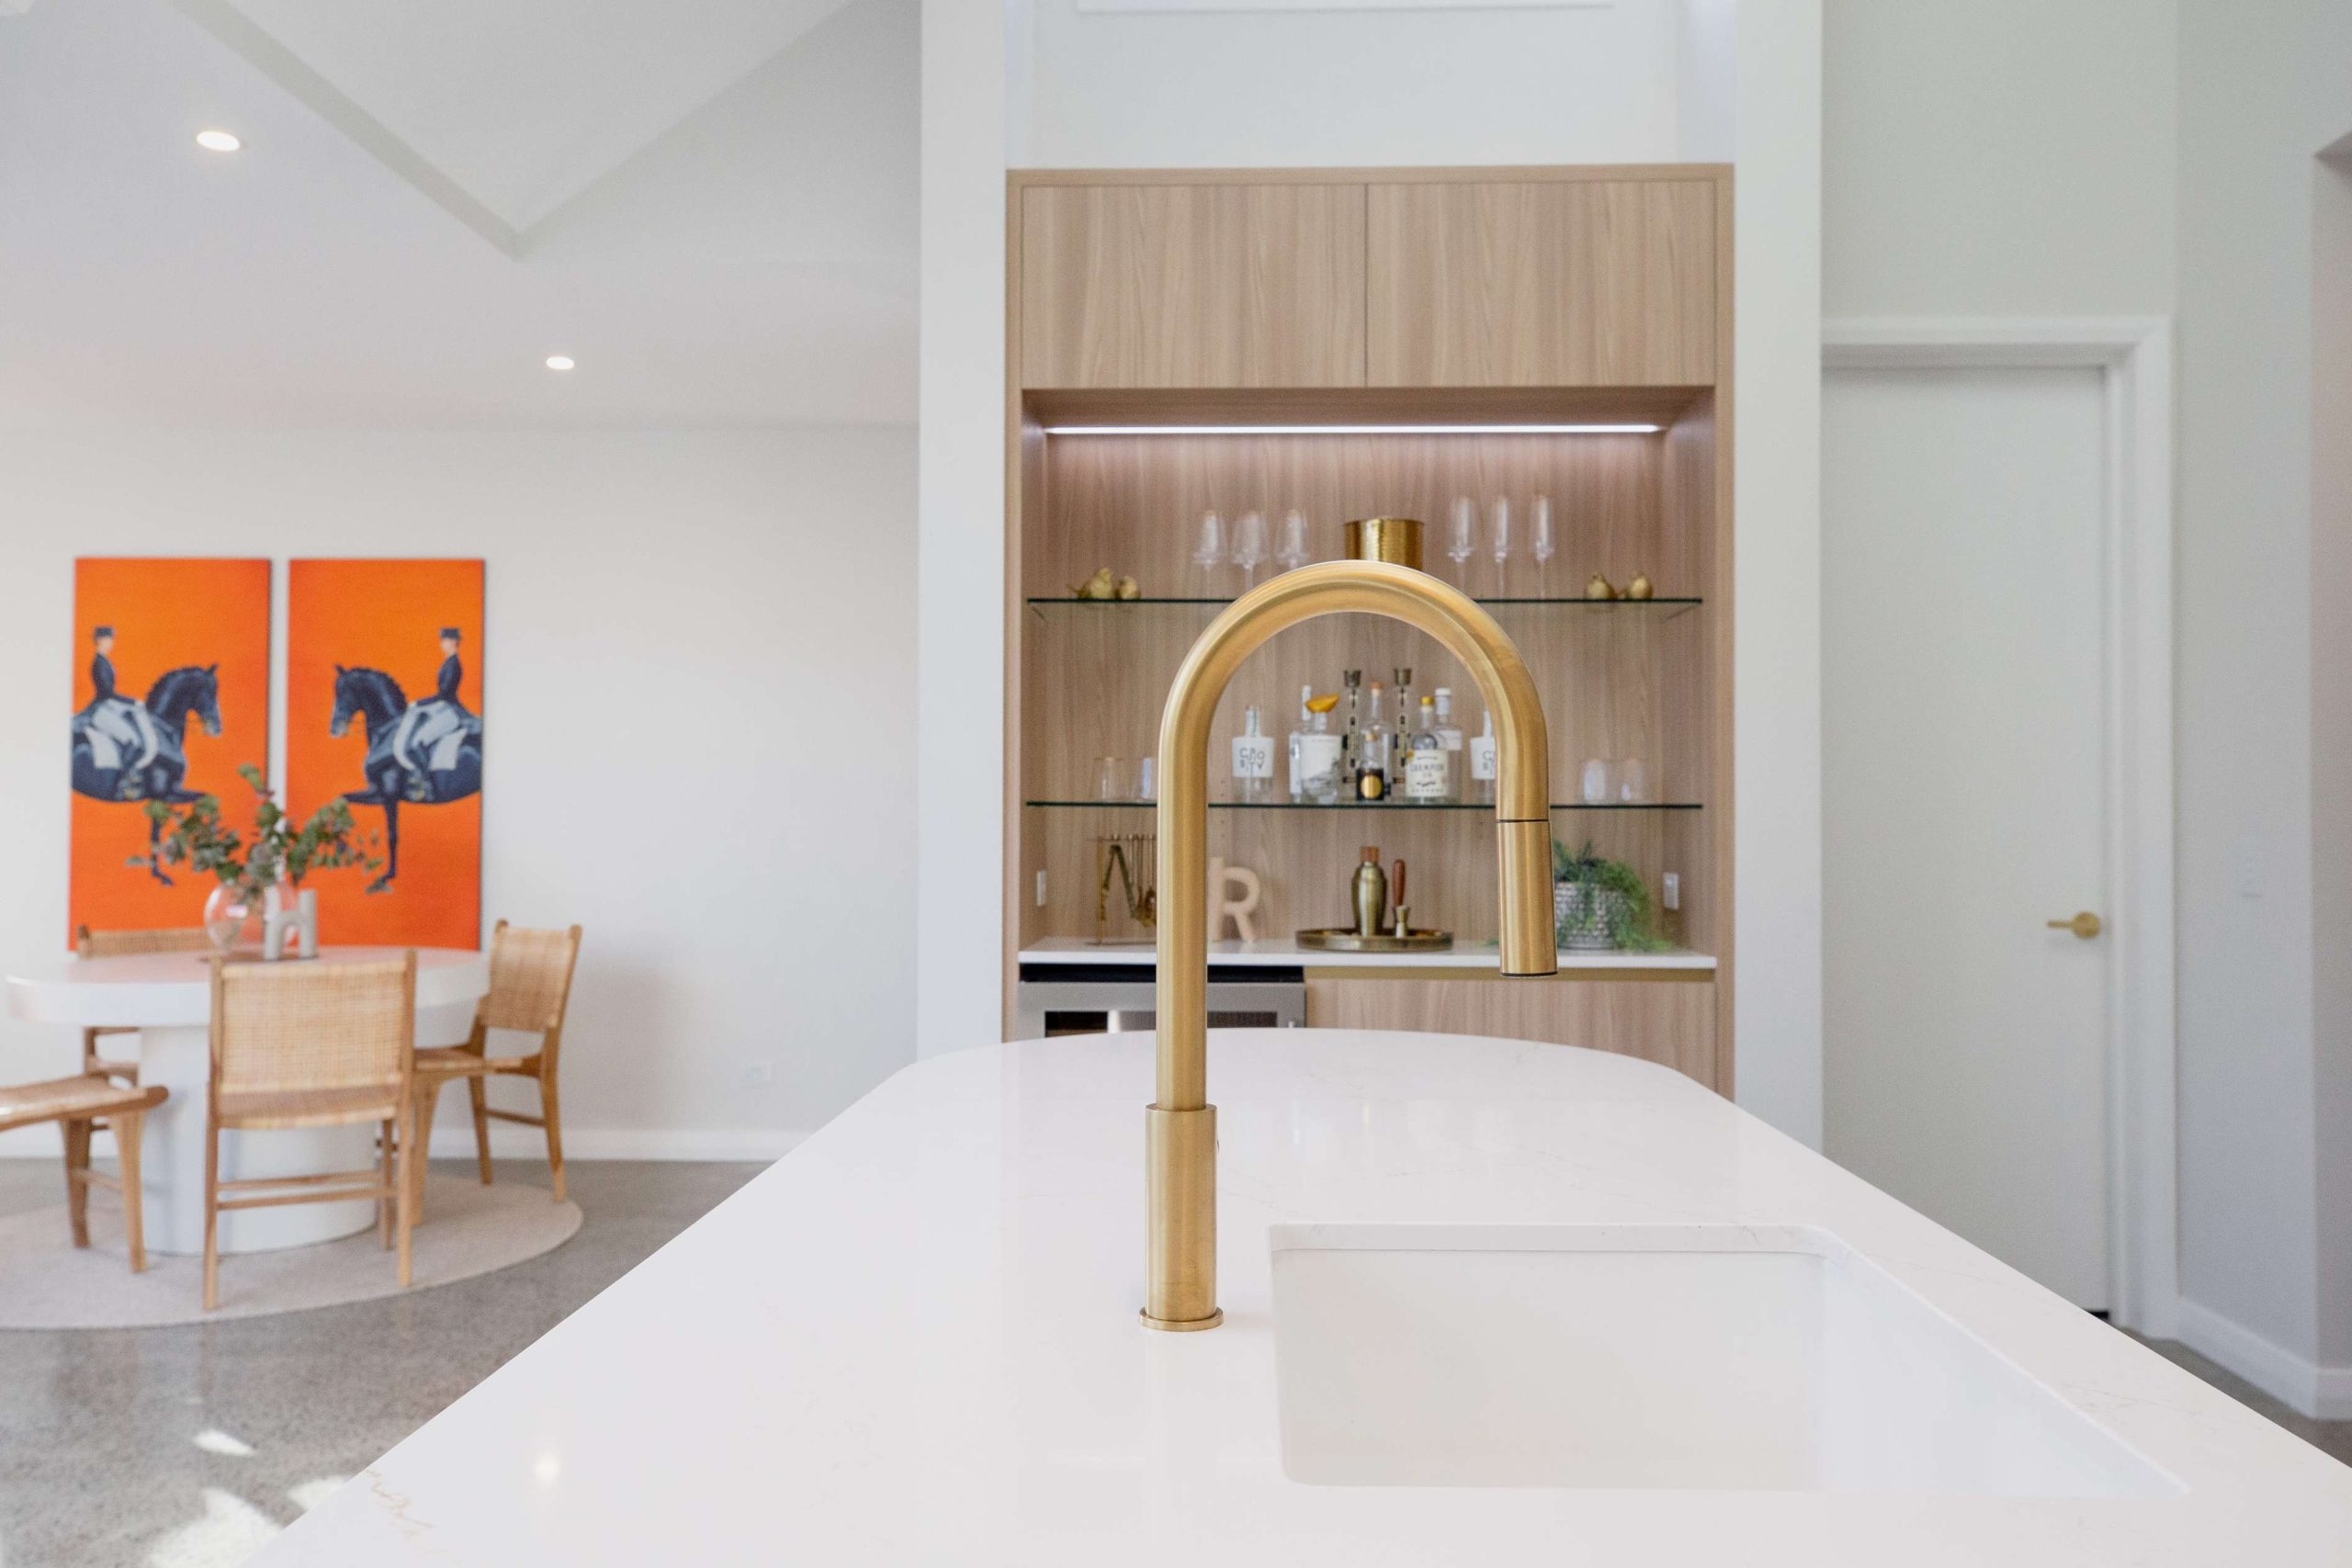 Explore Hallmark Homes Architecturally Designed Cardrona Showhome in Christchurch, Canterbury, New Zealand. A showcase of luxurious finishes & innovative design by Architect Phil Bidwell.